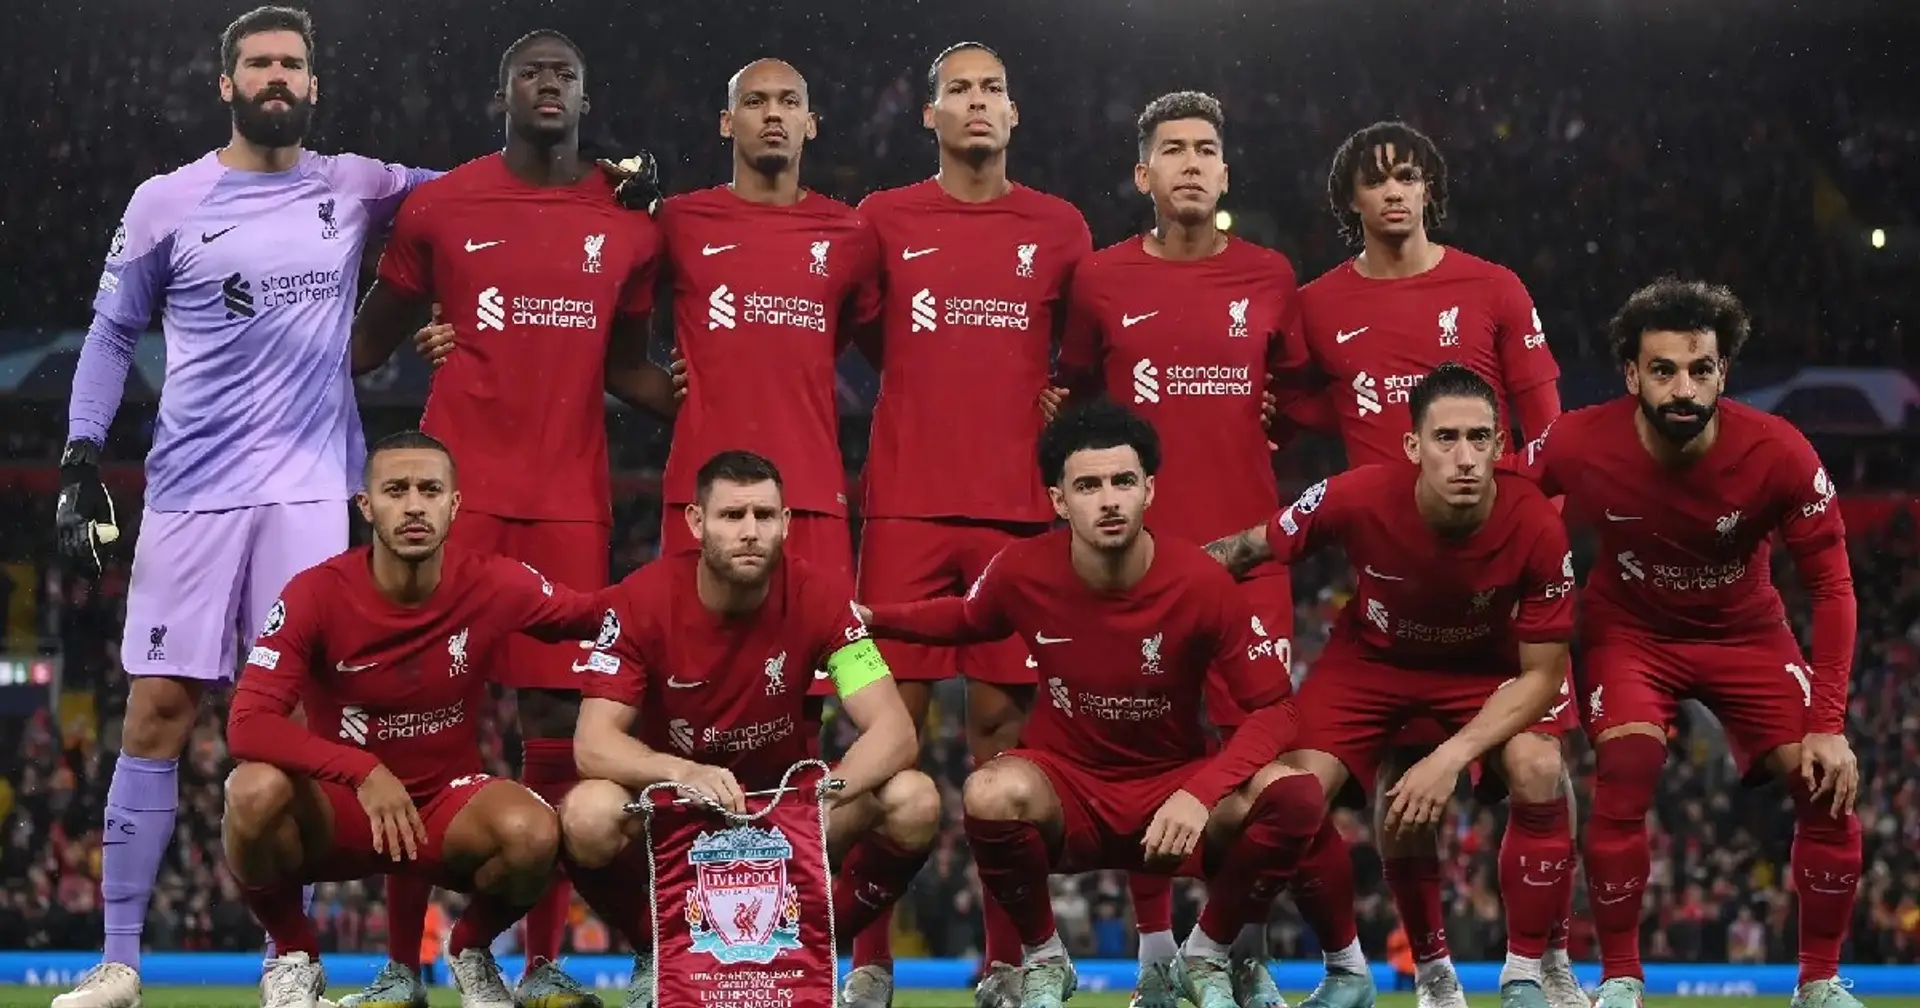 Who are your top 5 Liverpool players this season? 